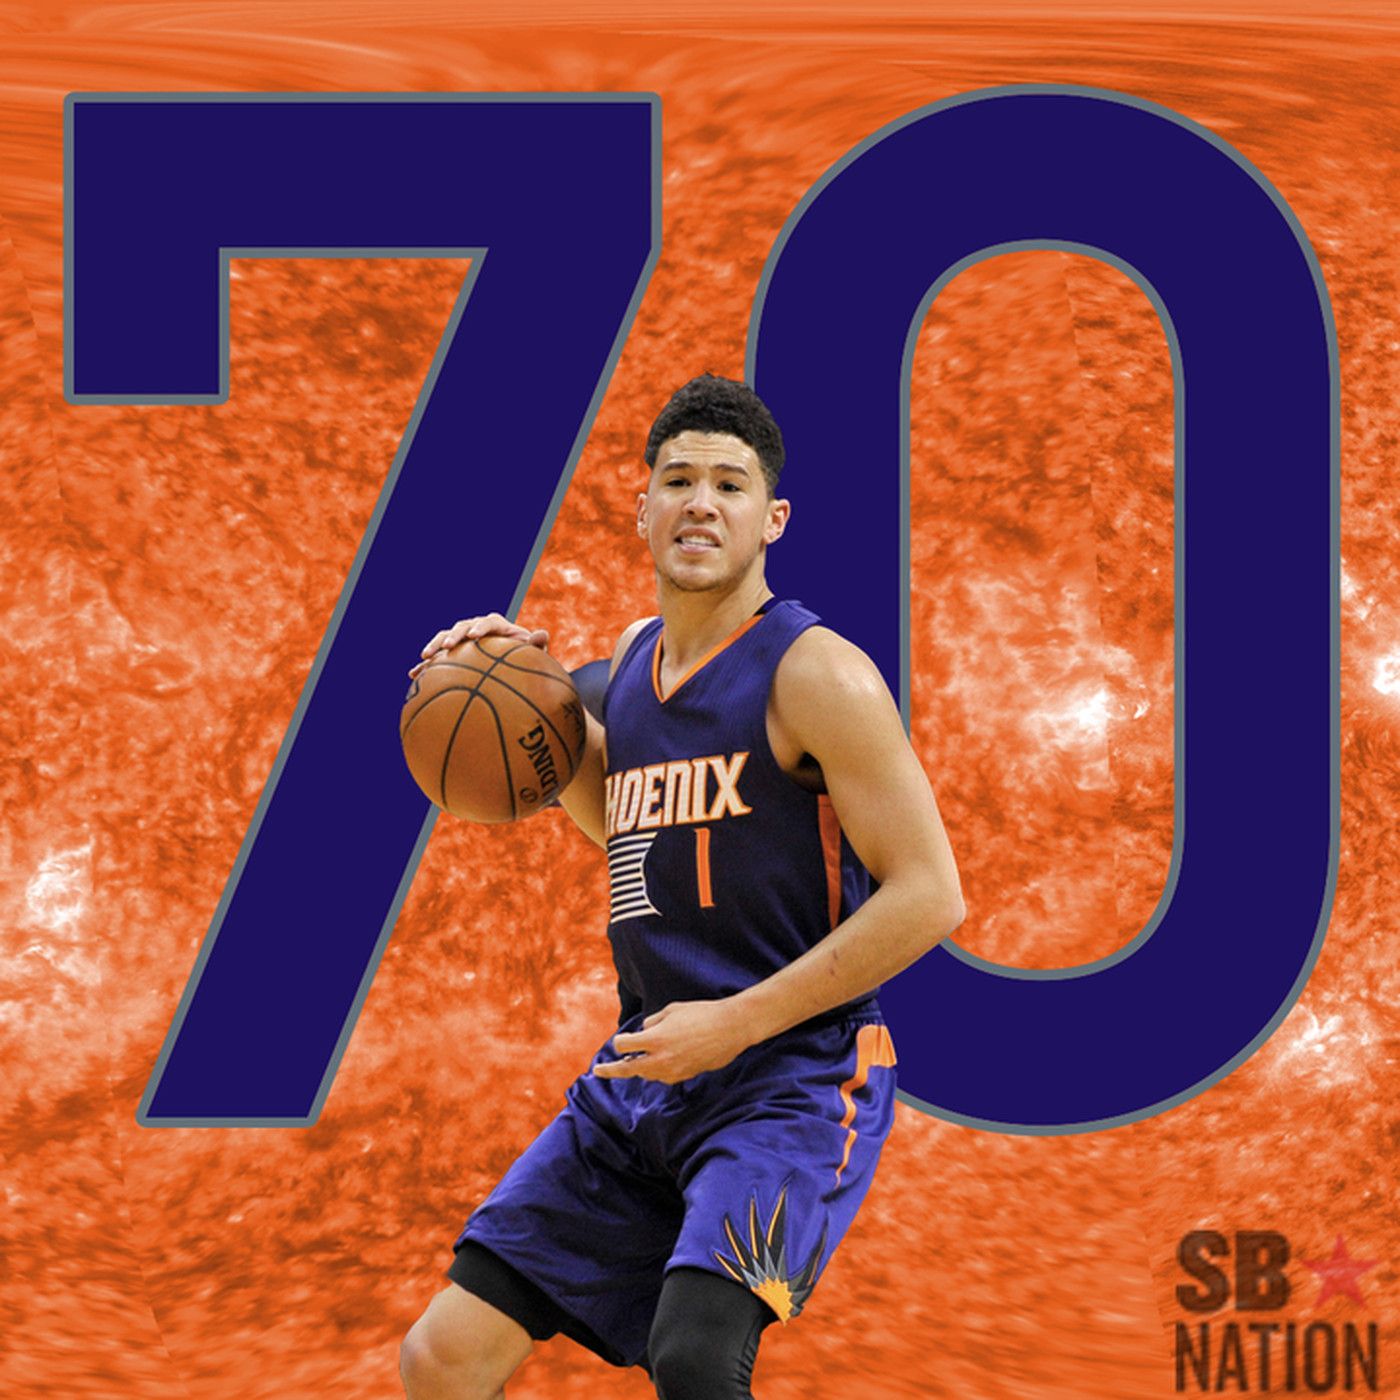 Devin Booker becomes 6th player to score 70 points in a game